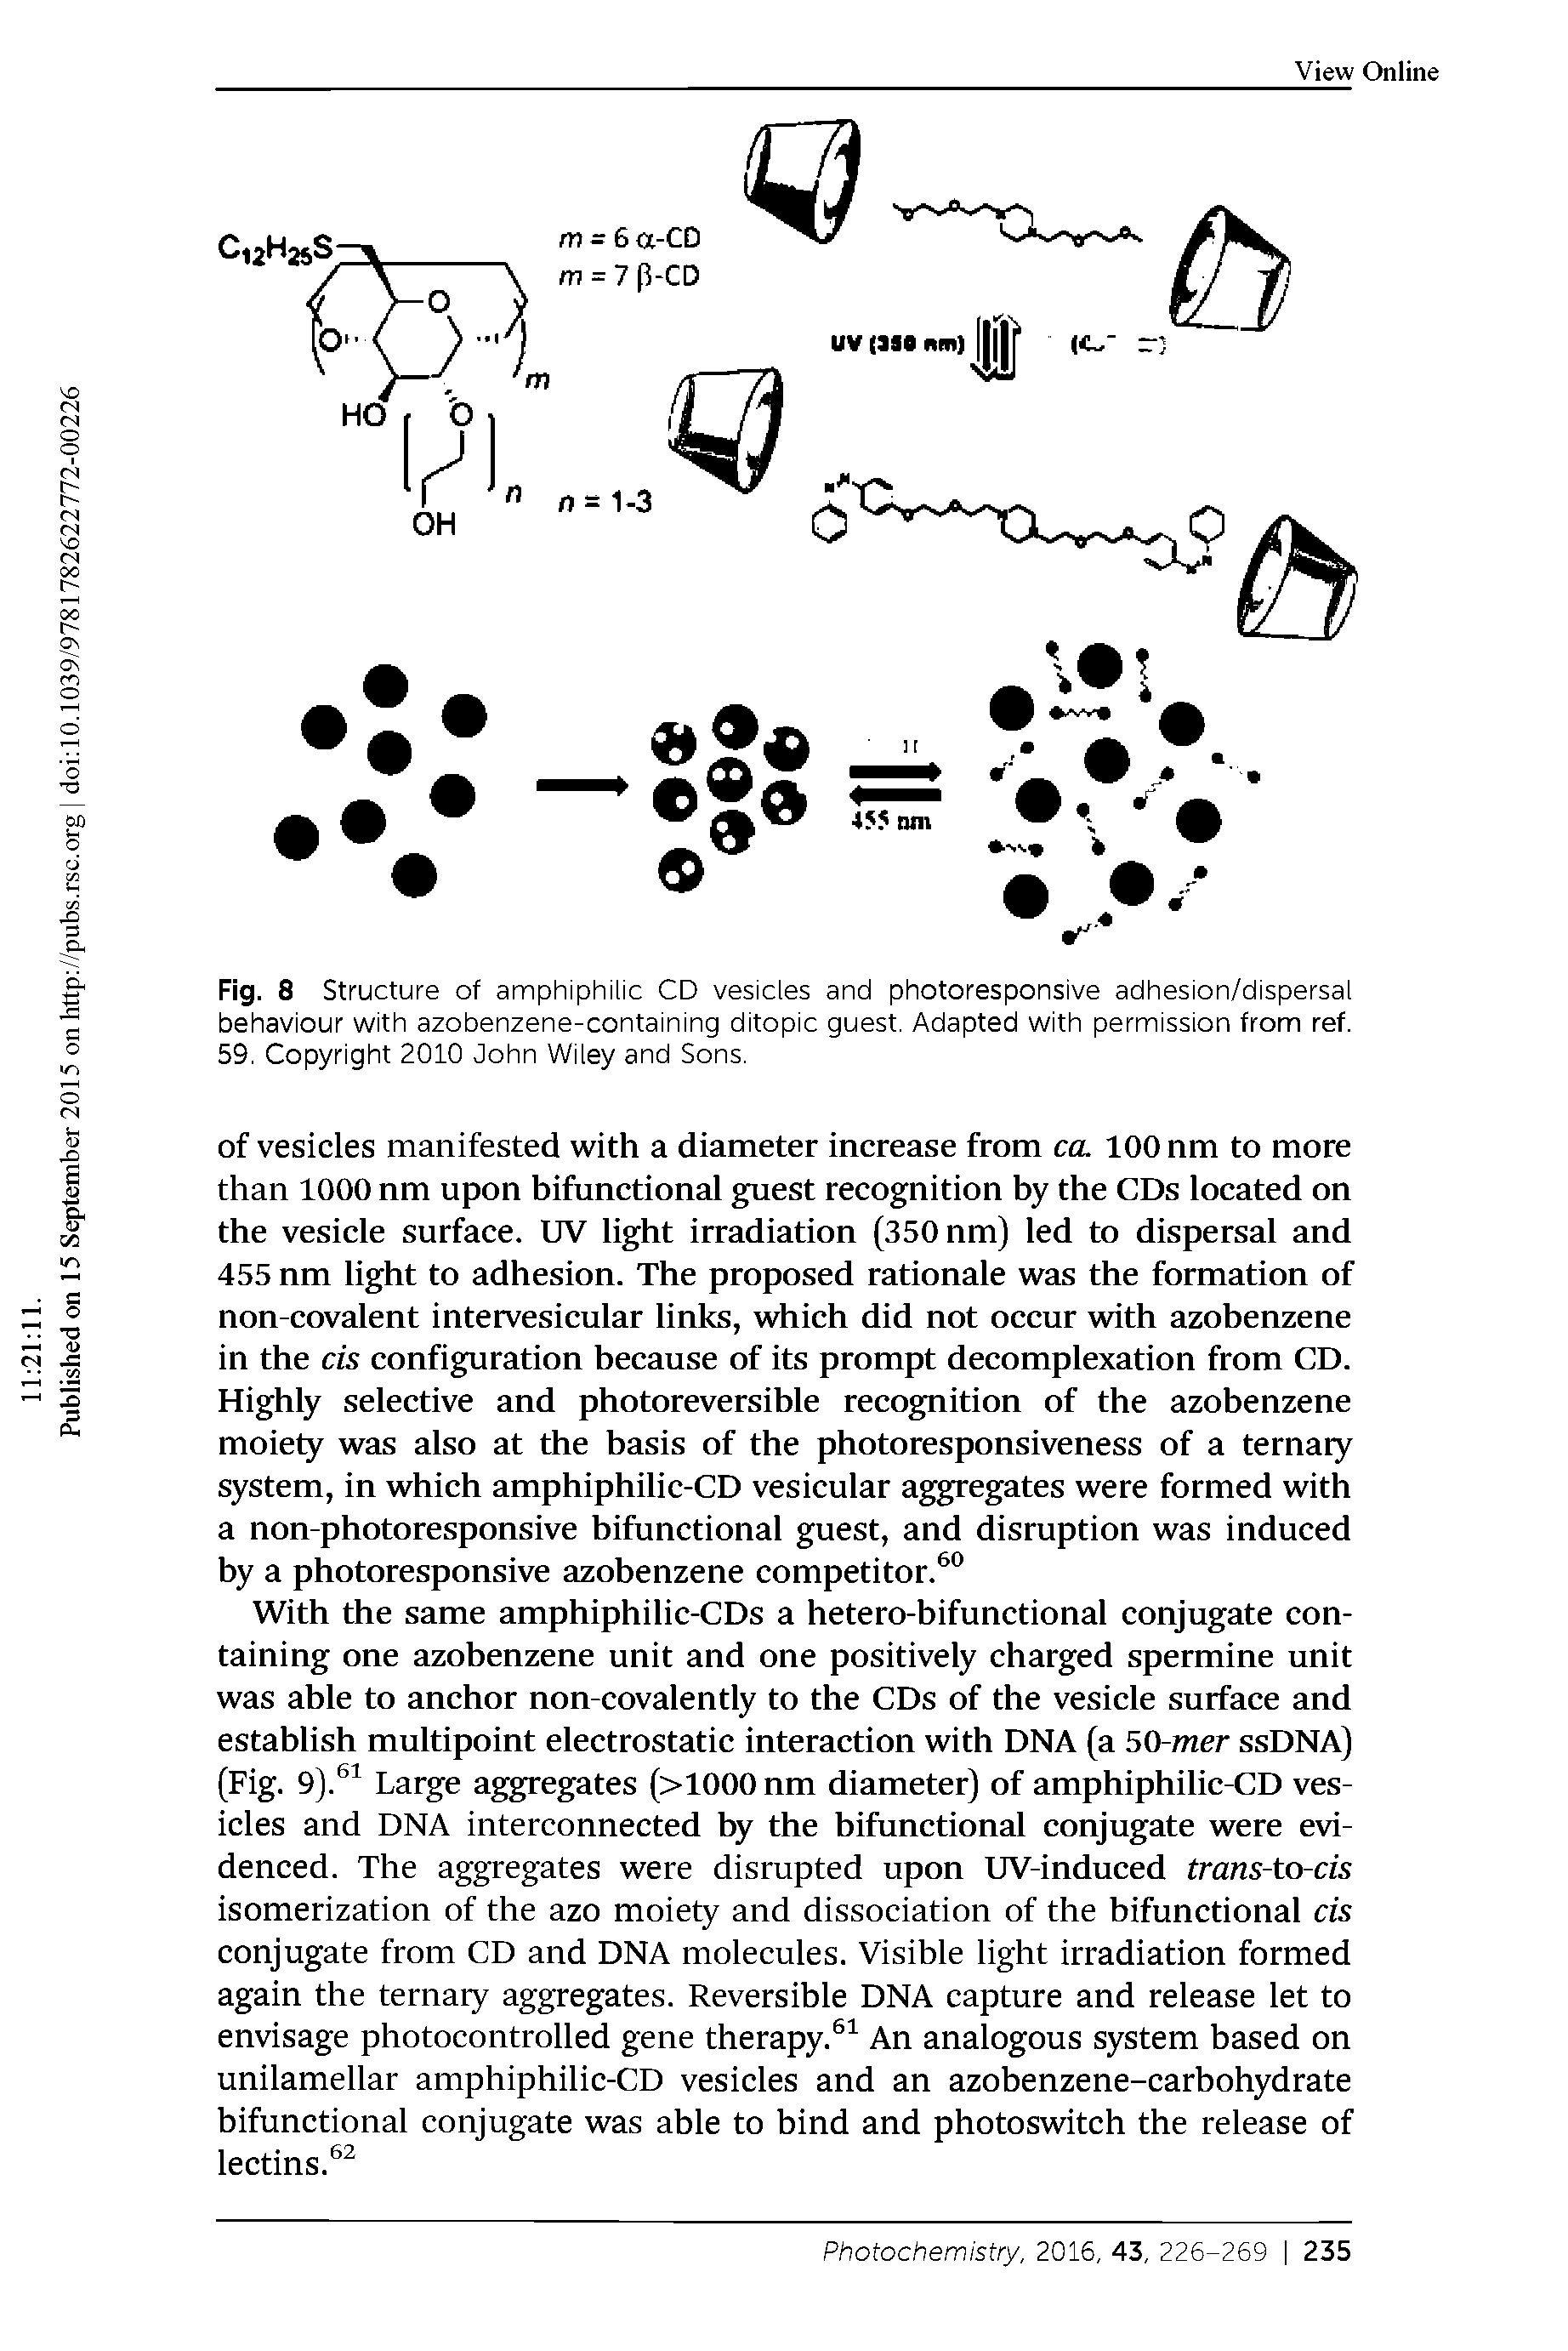 Fig. 8 Structure of amphiphilic CD vesicles and photoresponsive adhesion/dispersal behaviour with azobenzene-containing ditopic guest. Adapted with permission from ref. 59. Copyright 2010 John Wiley and Sons.